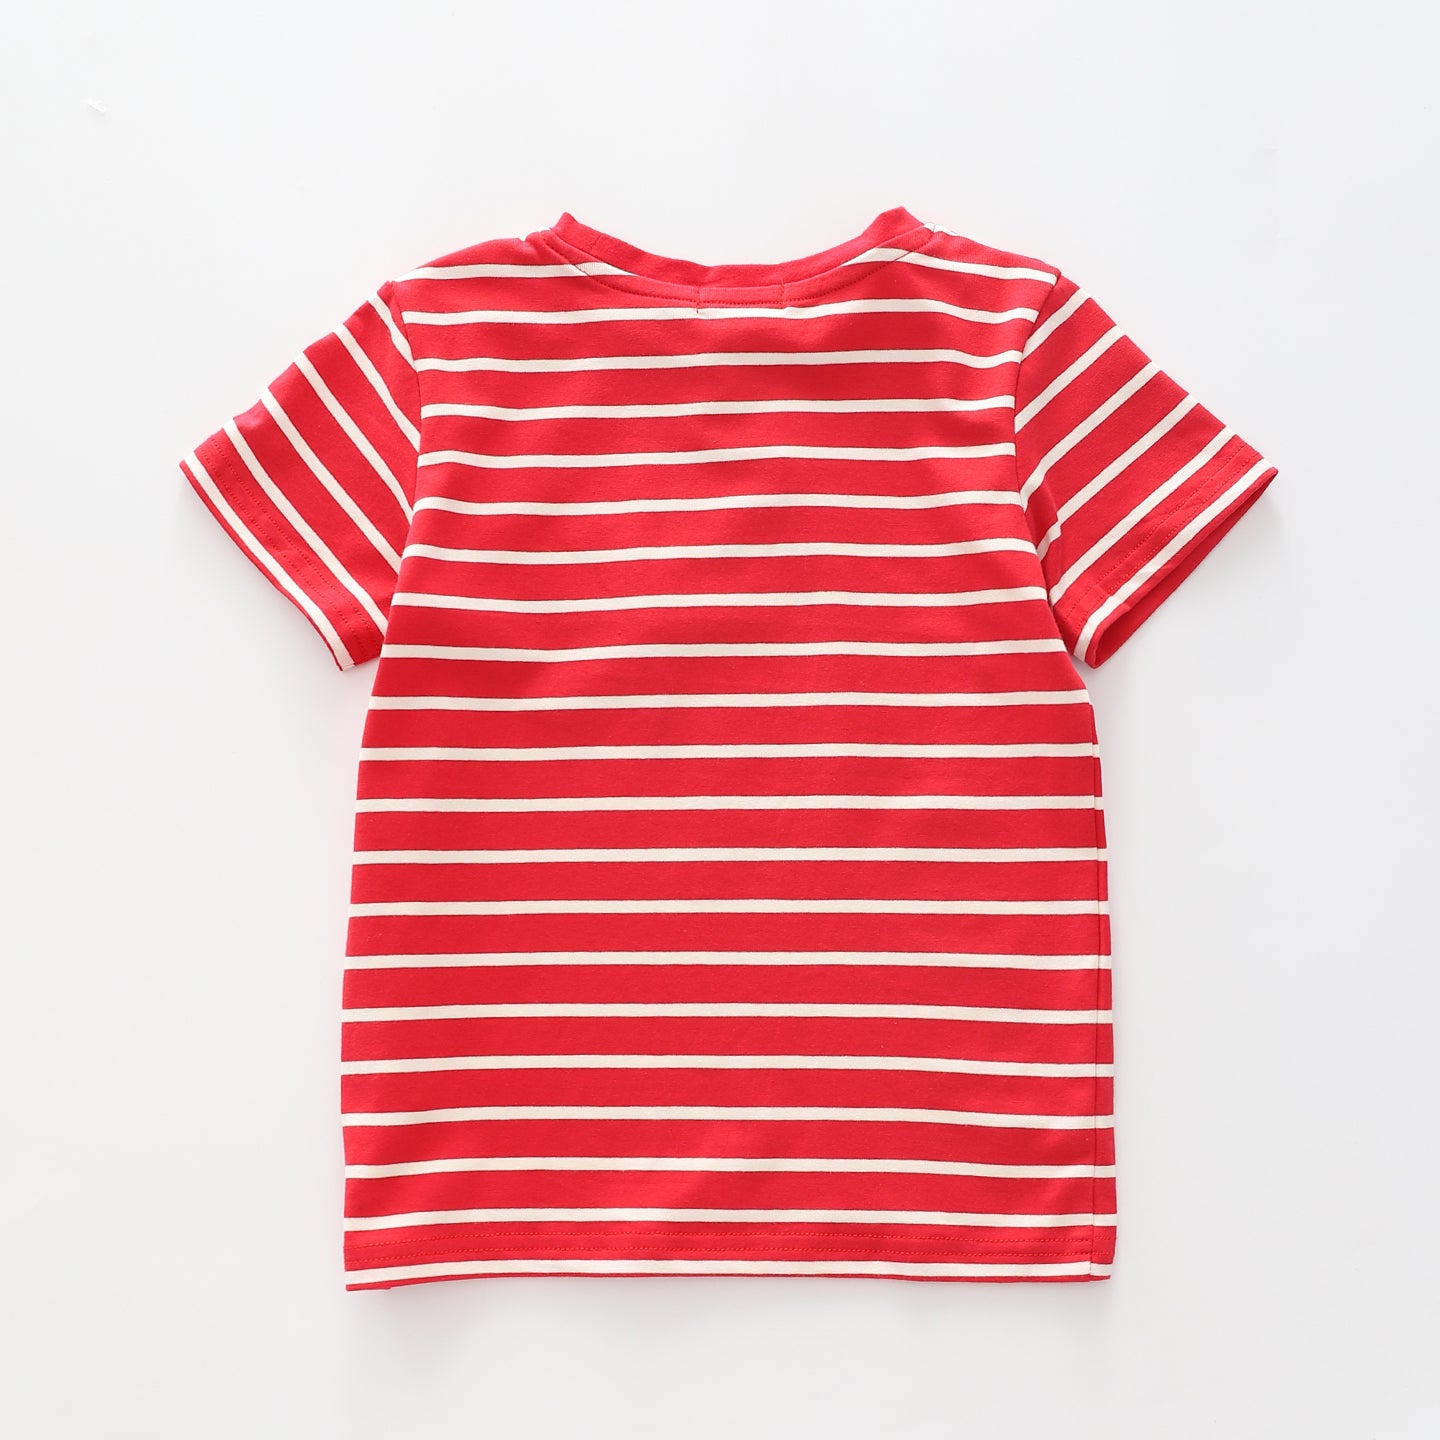 Classic Red Stripes, Older Boys Top